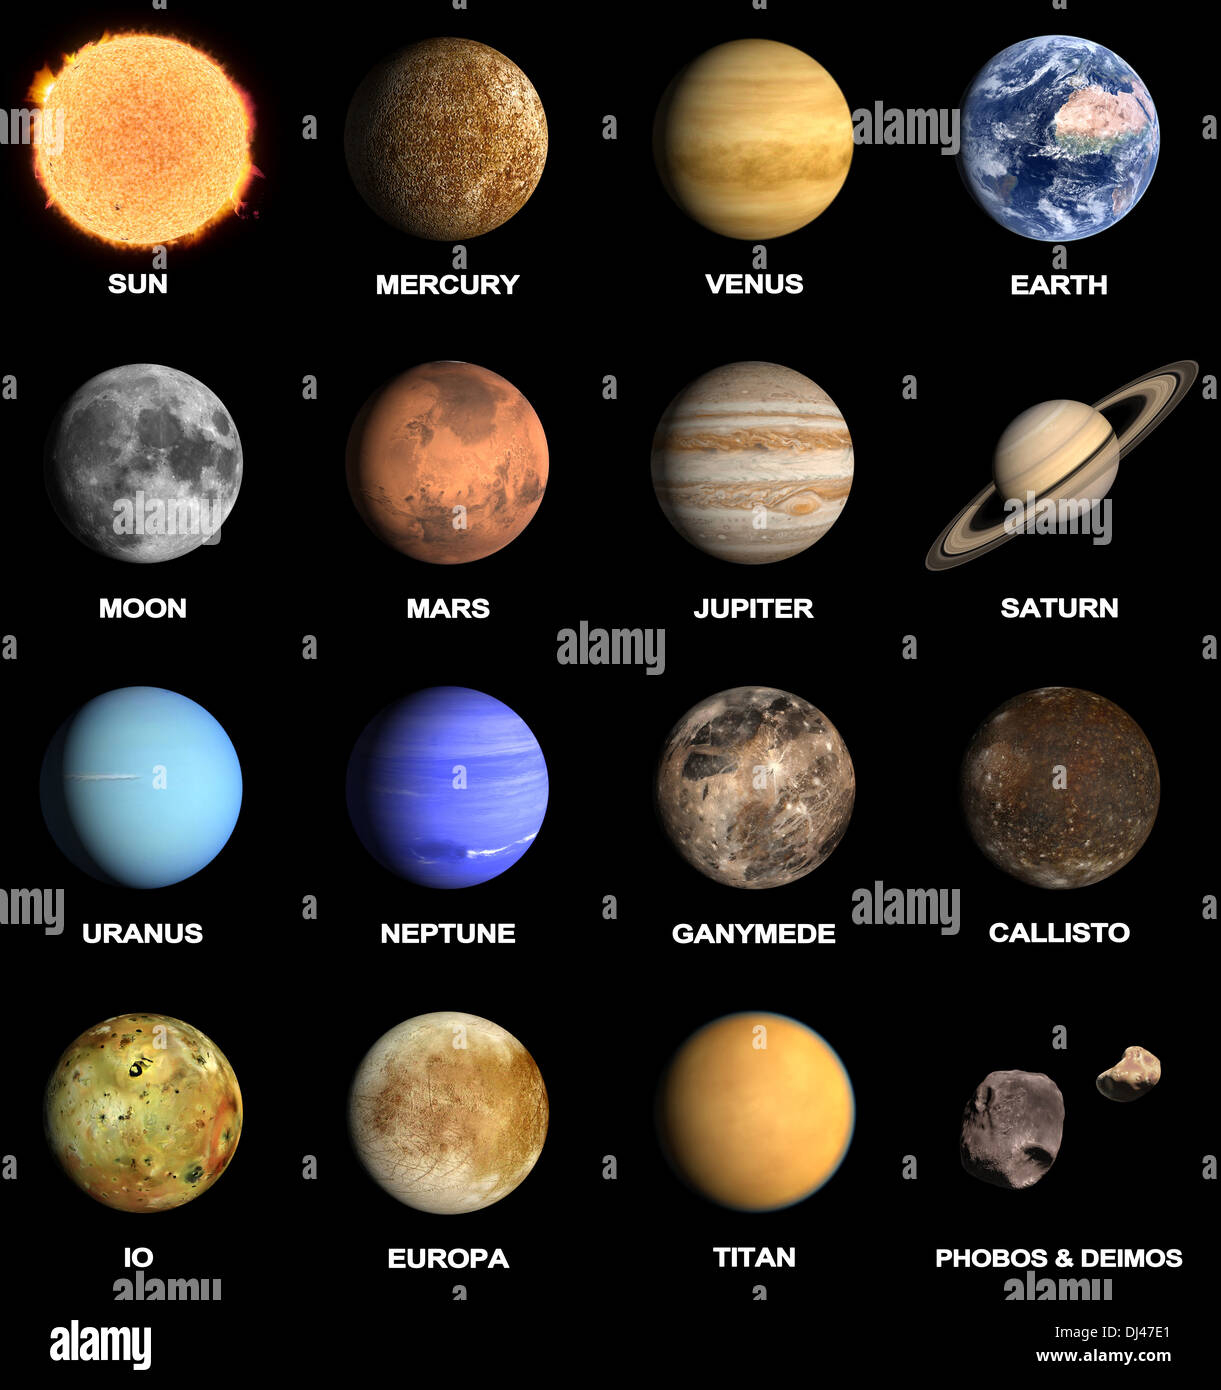 A Rendered Image Of The Planets And Some Moons Of Our Solar System